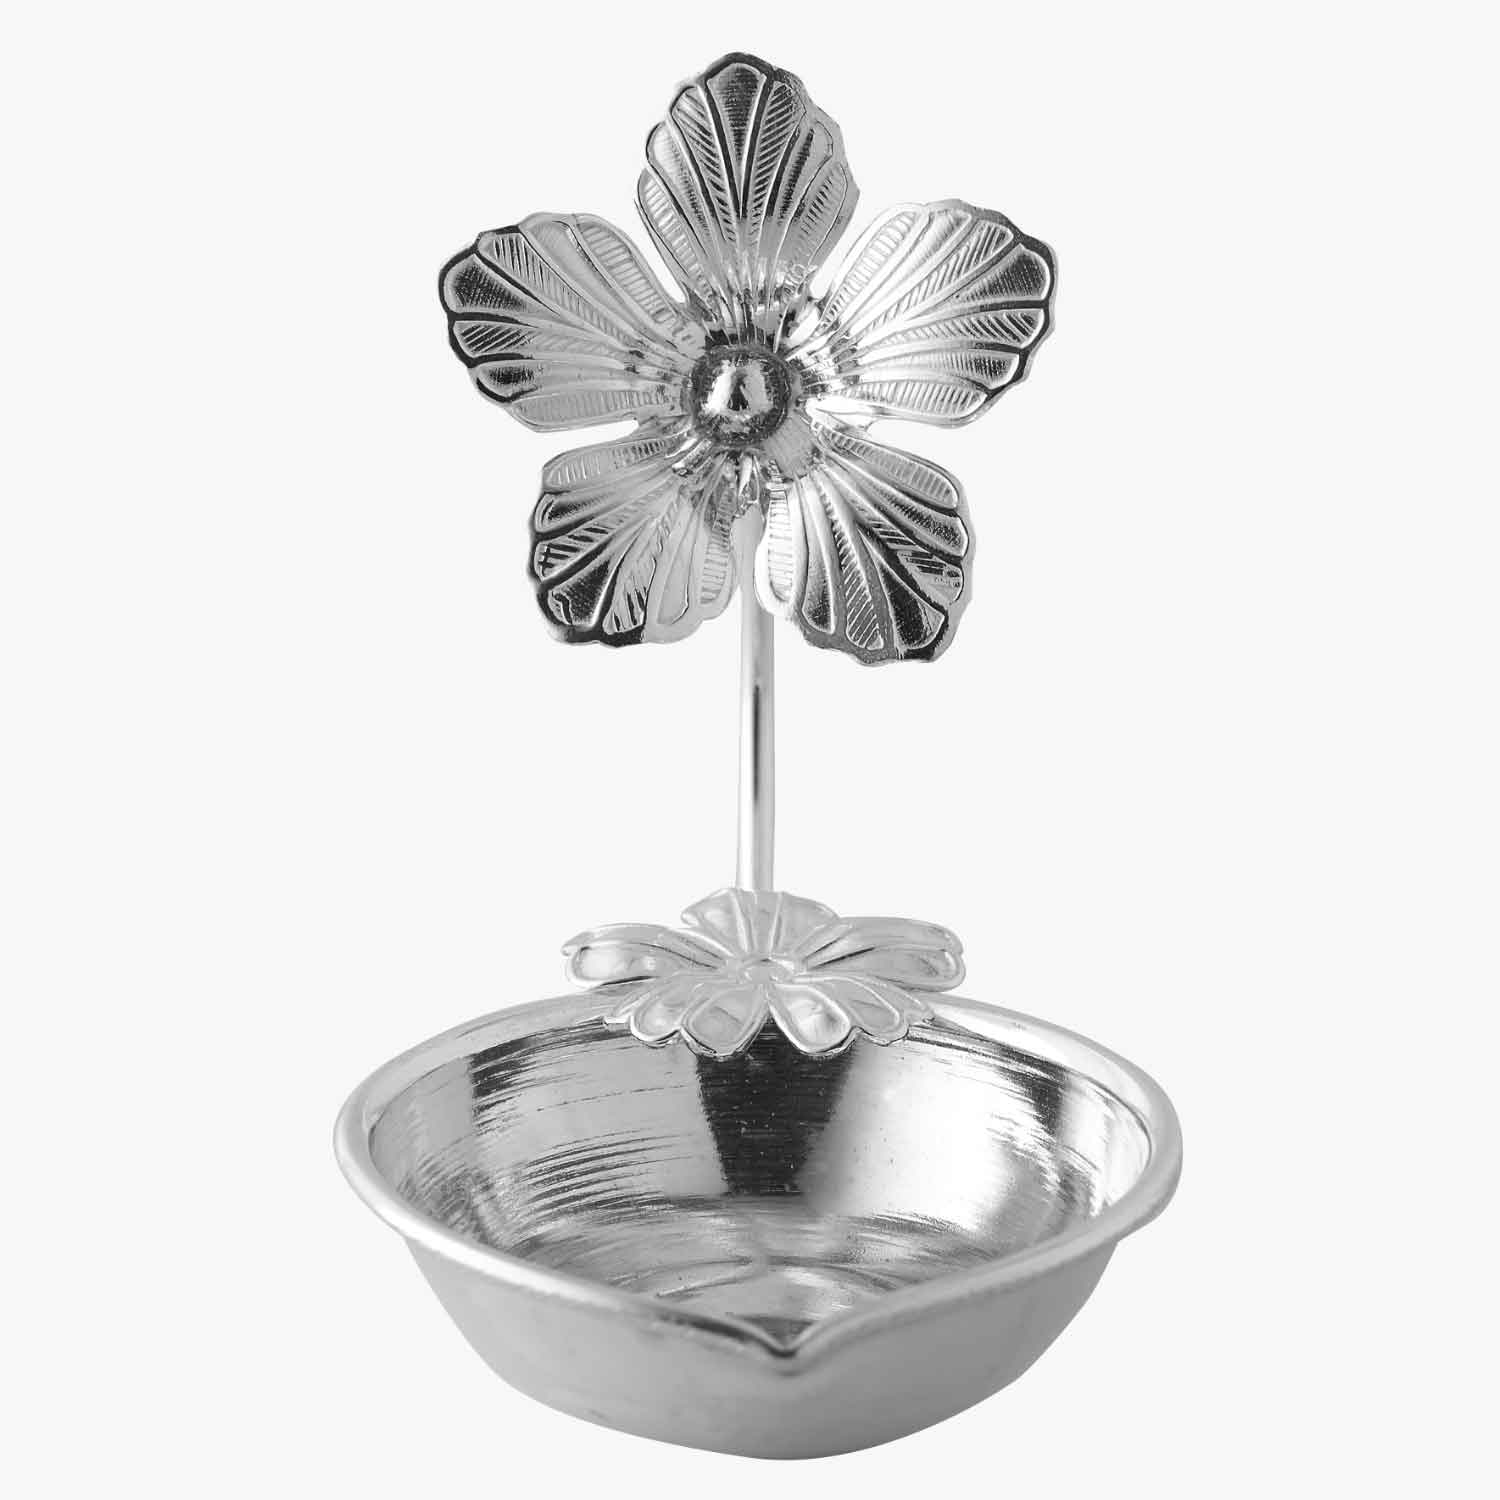 Buy MAA SILVER Pure Silver Diya/Lamp/Deepak with Round Shape Perfect for  Gifting and Everyday Pooja Use (97 Purity)(20 Grams) Online at Low Prices  in India - Amazon.in